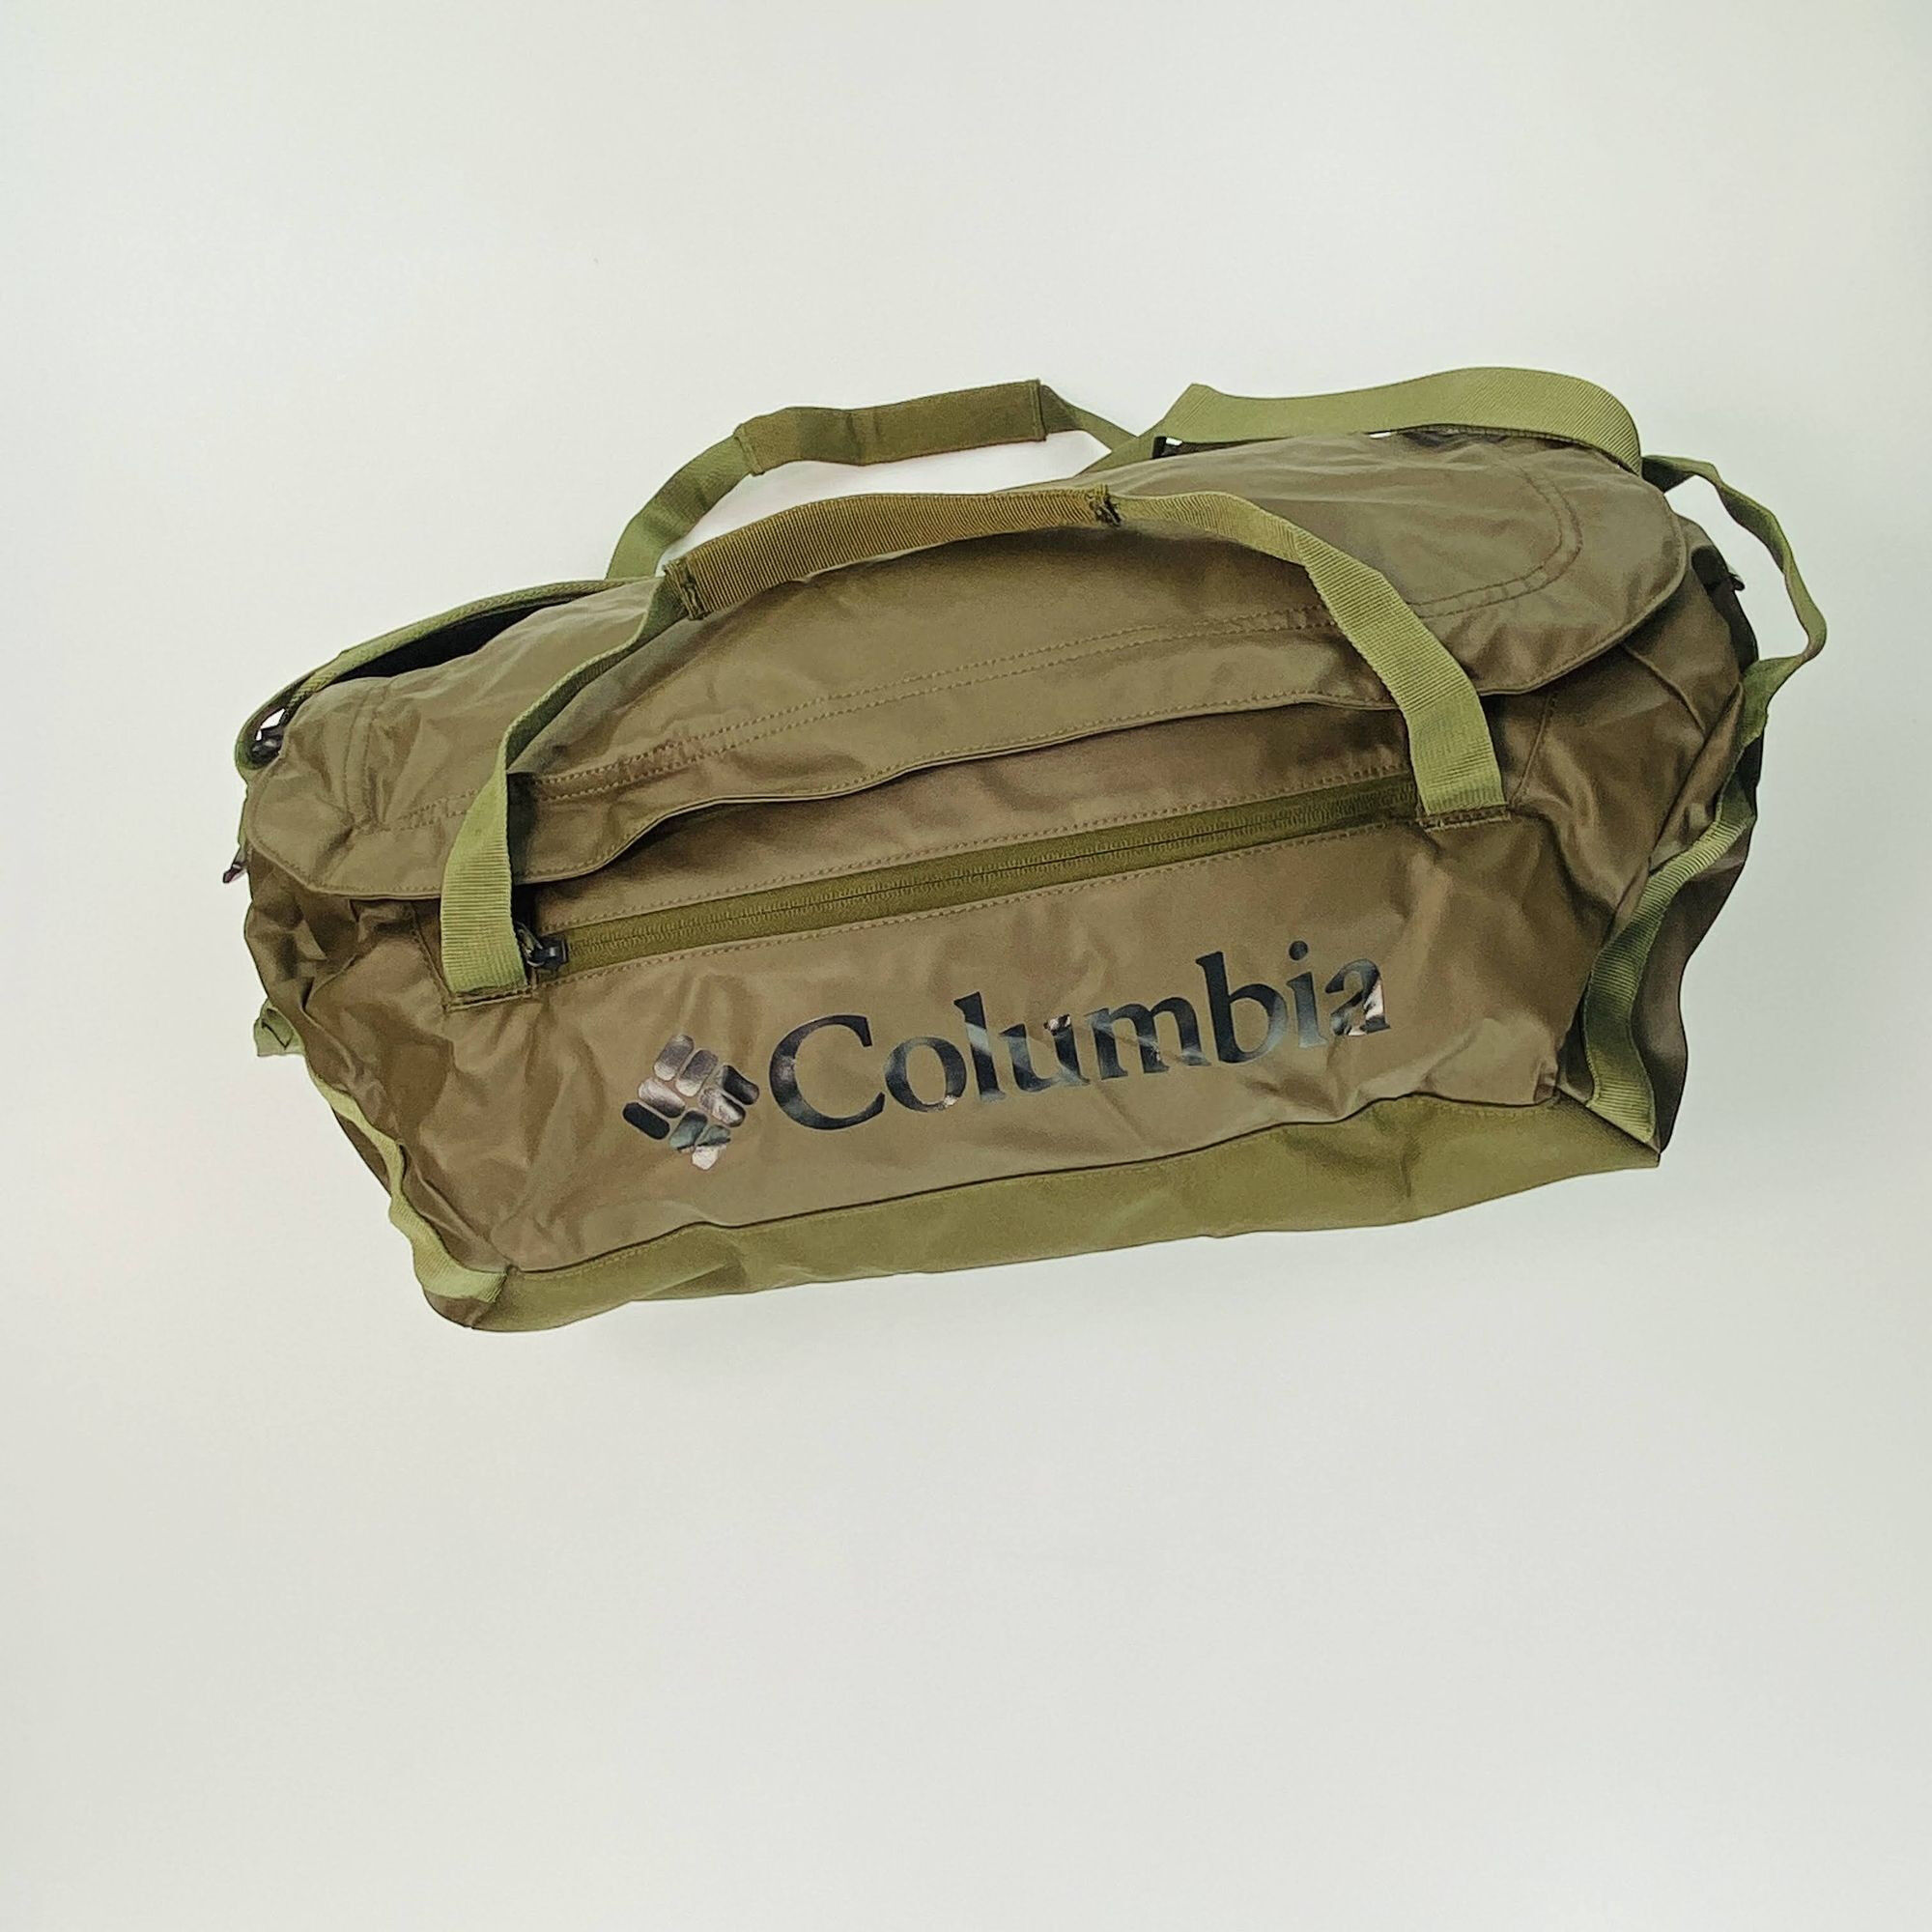 Columbia On The Go™ 40L Duffle - Seconde main Duffel - Marron - Taille unique | Hardloop